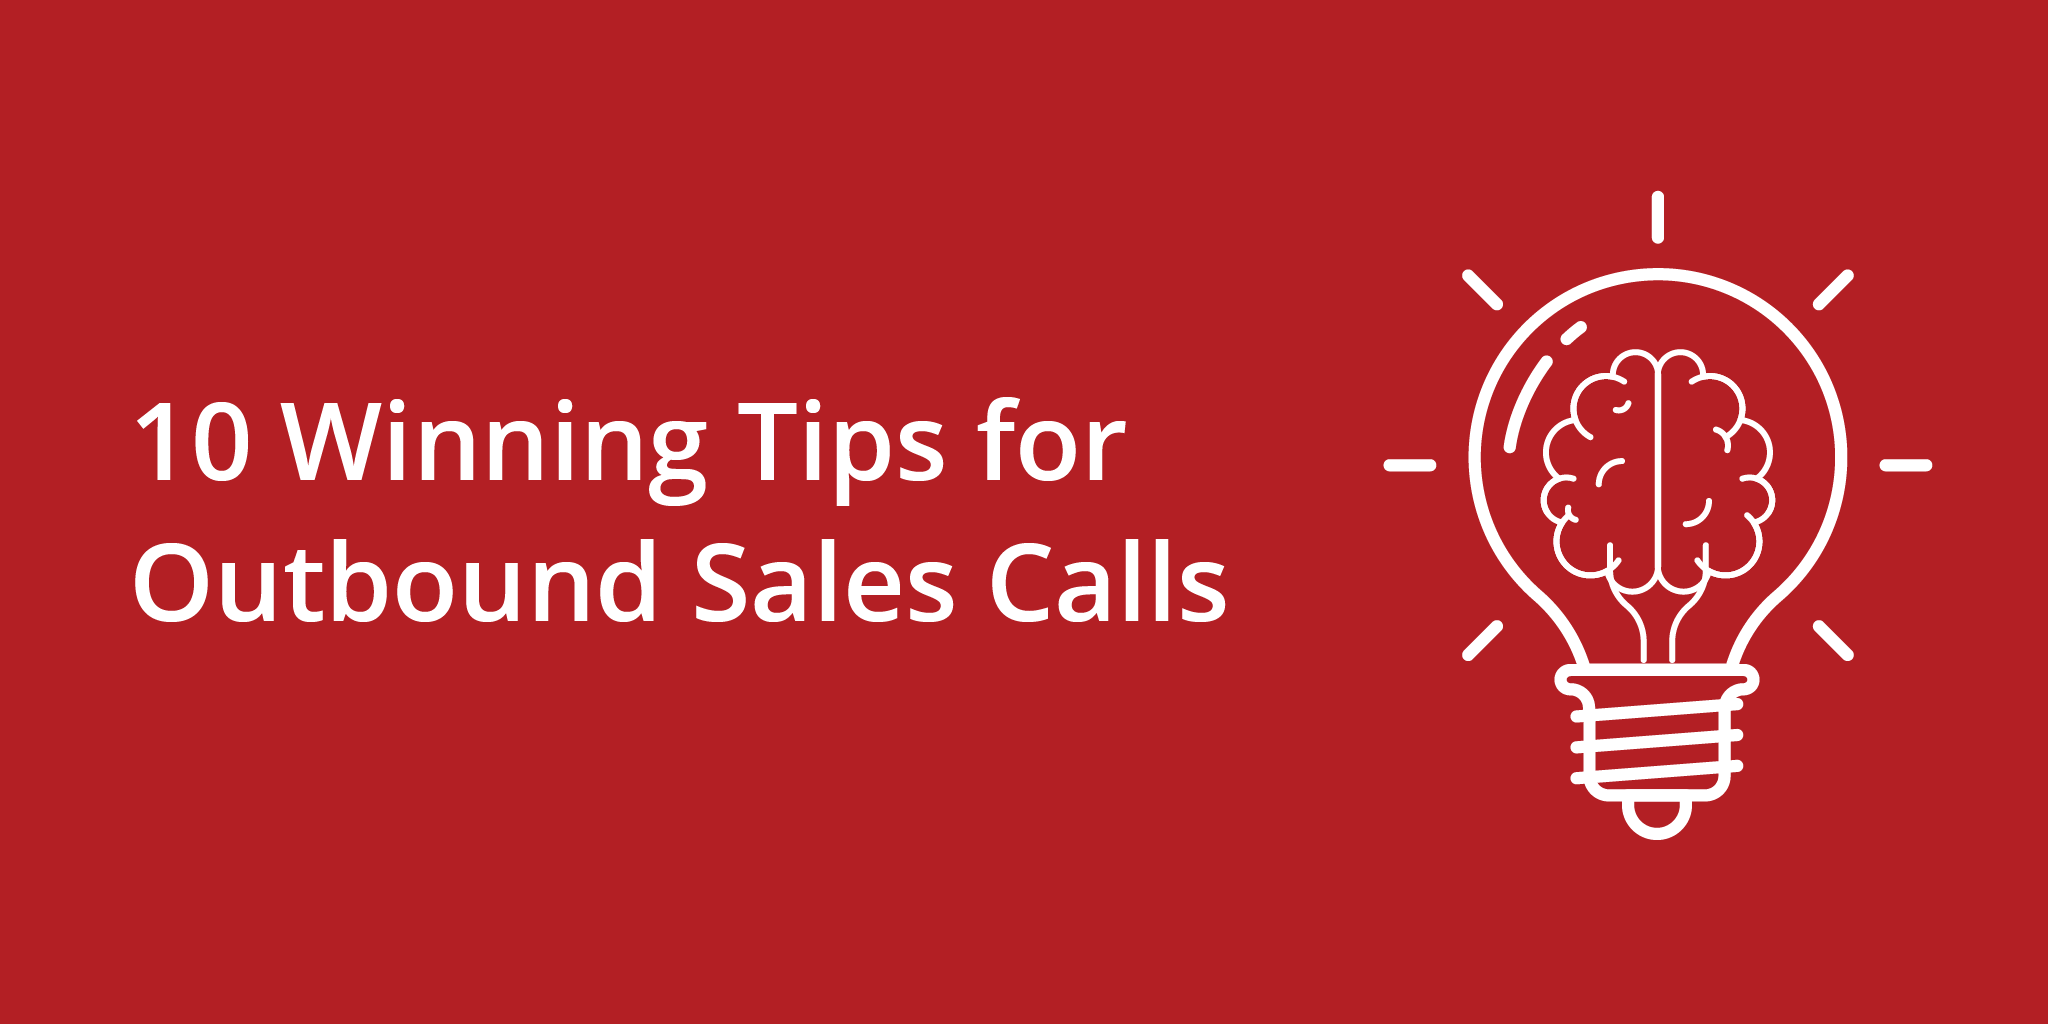 10 Winning Tips for Outbound Sales Calls | Telephones for business